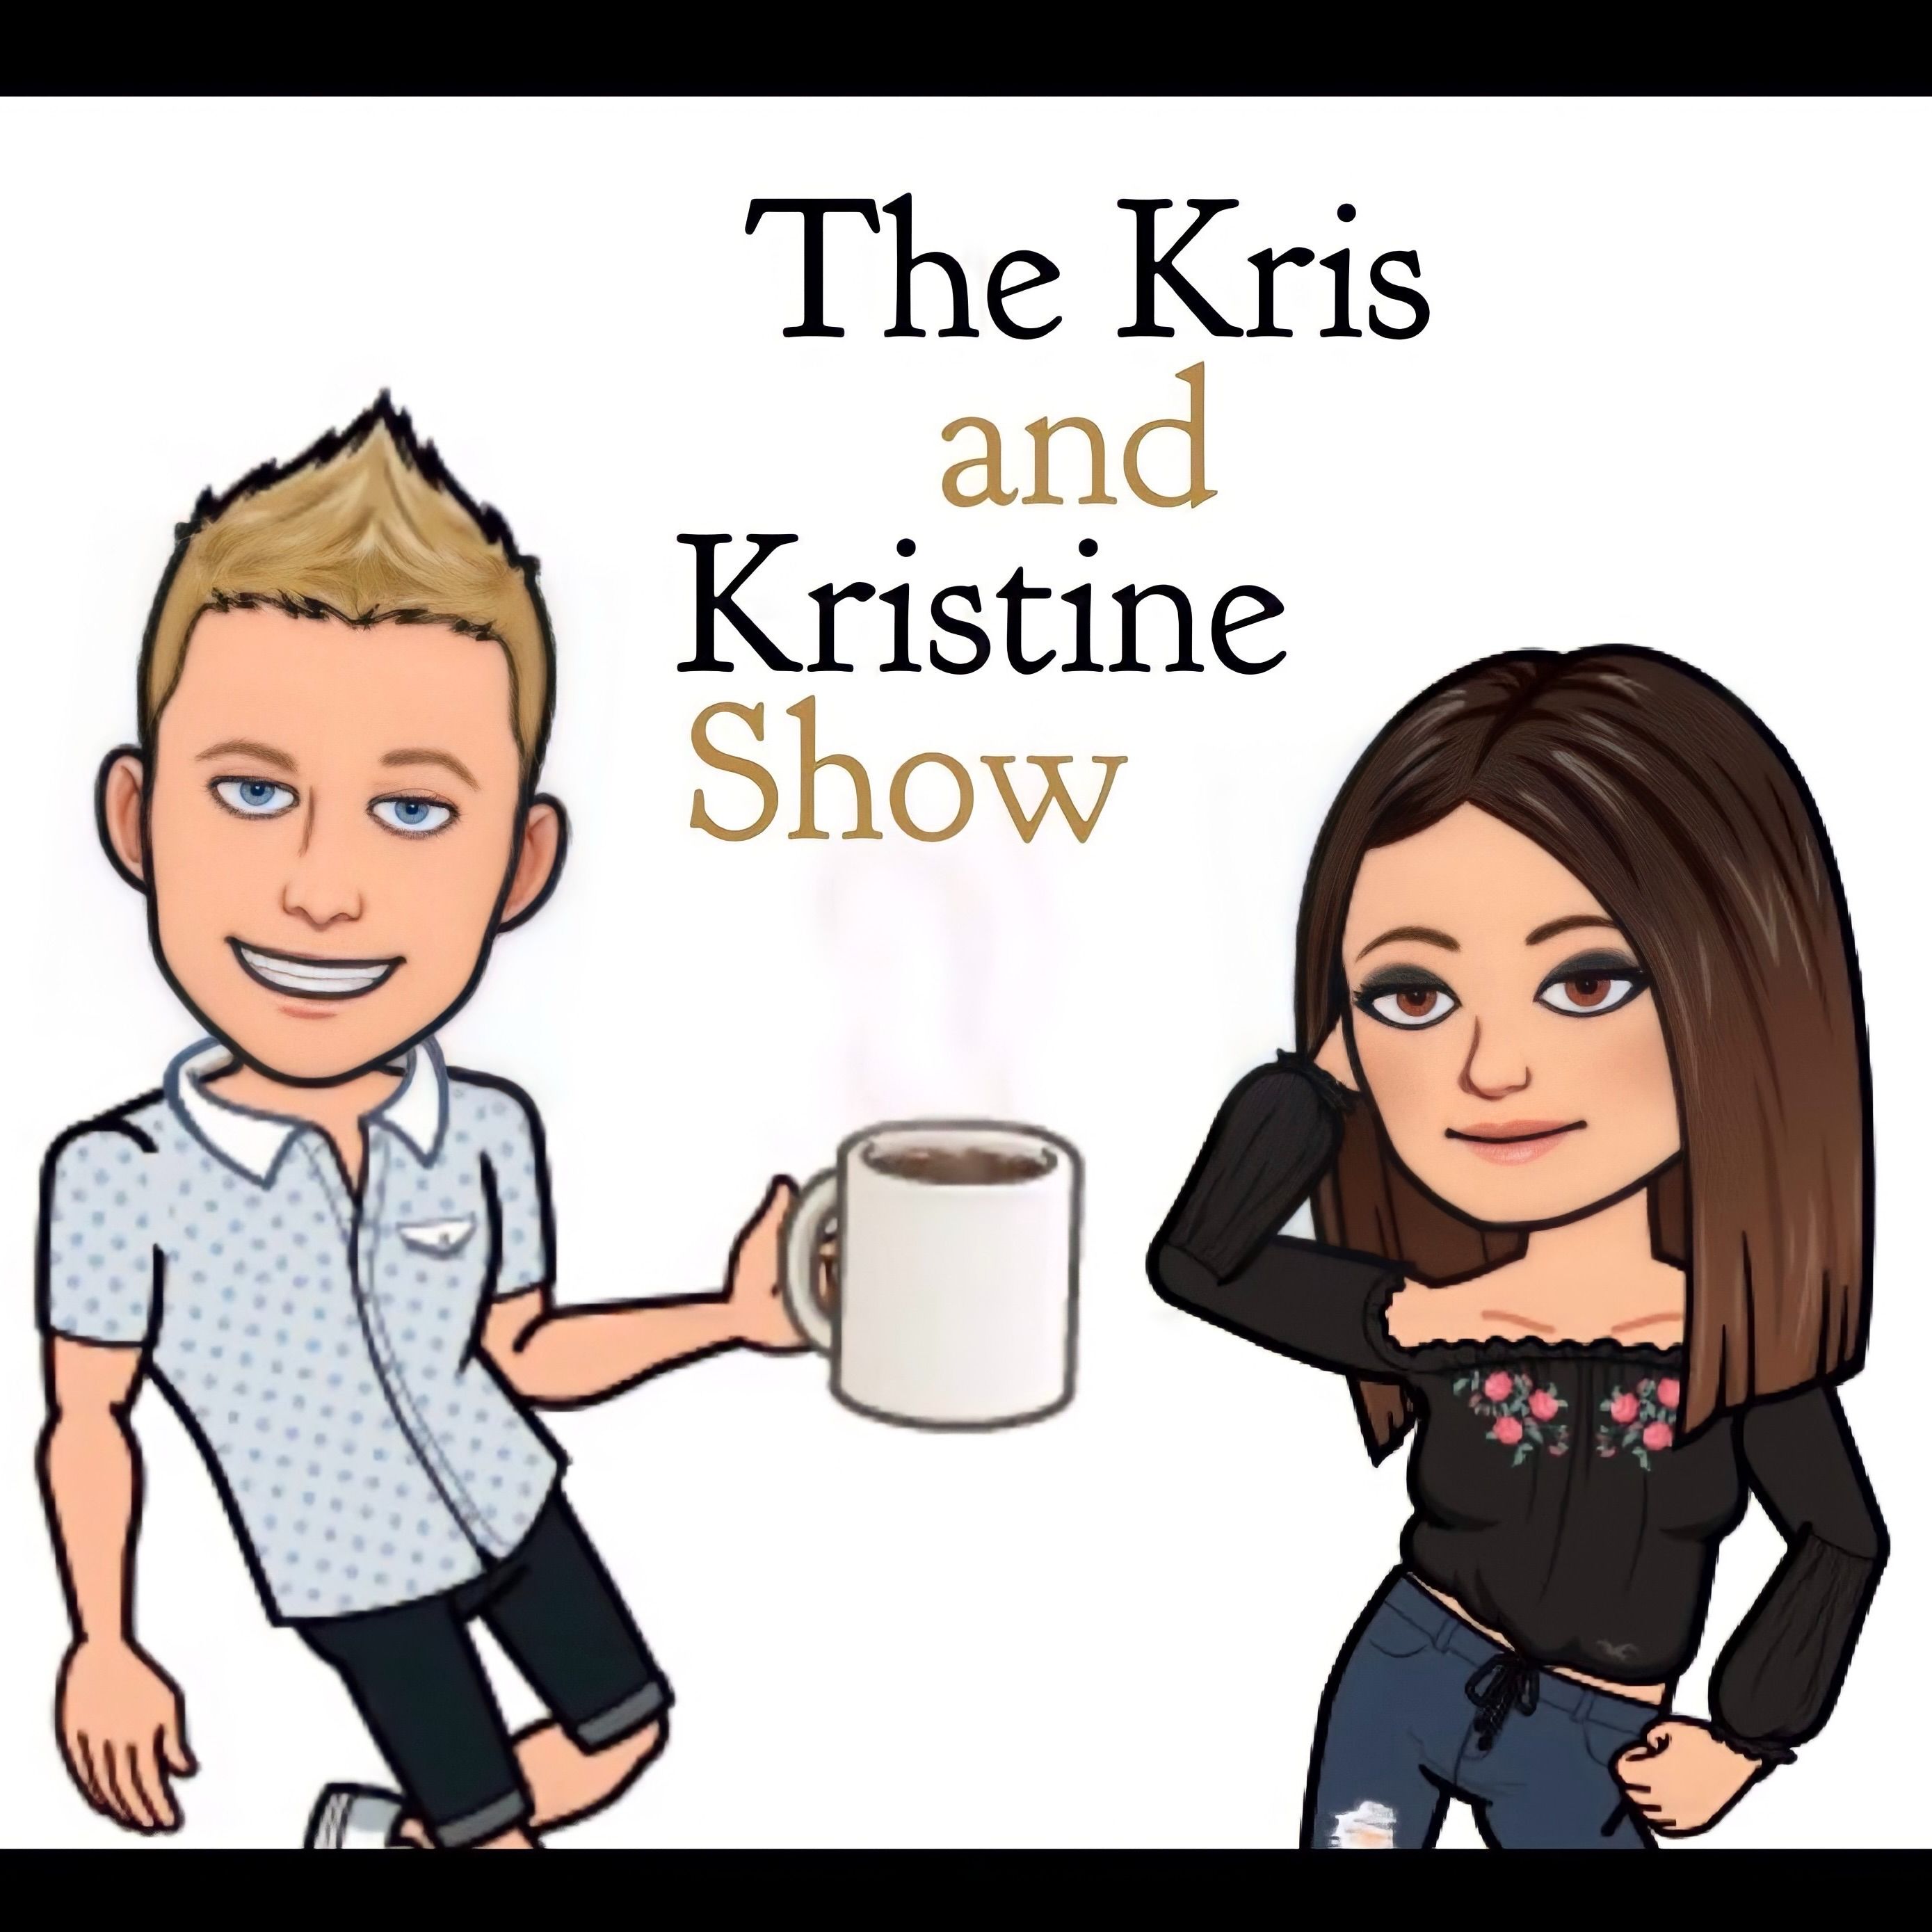 The Kris and Kristine Show